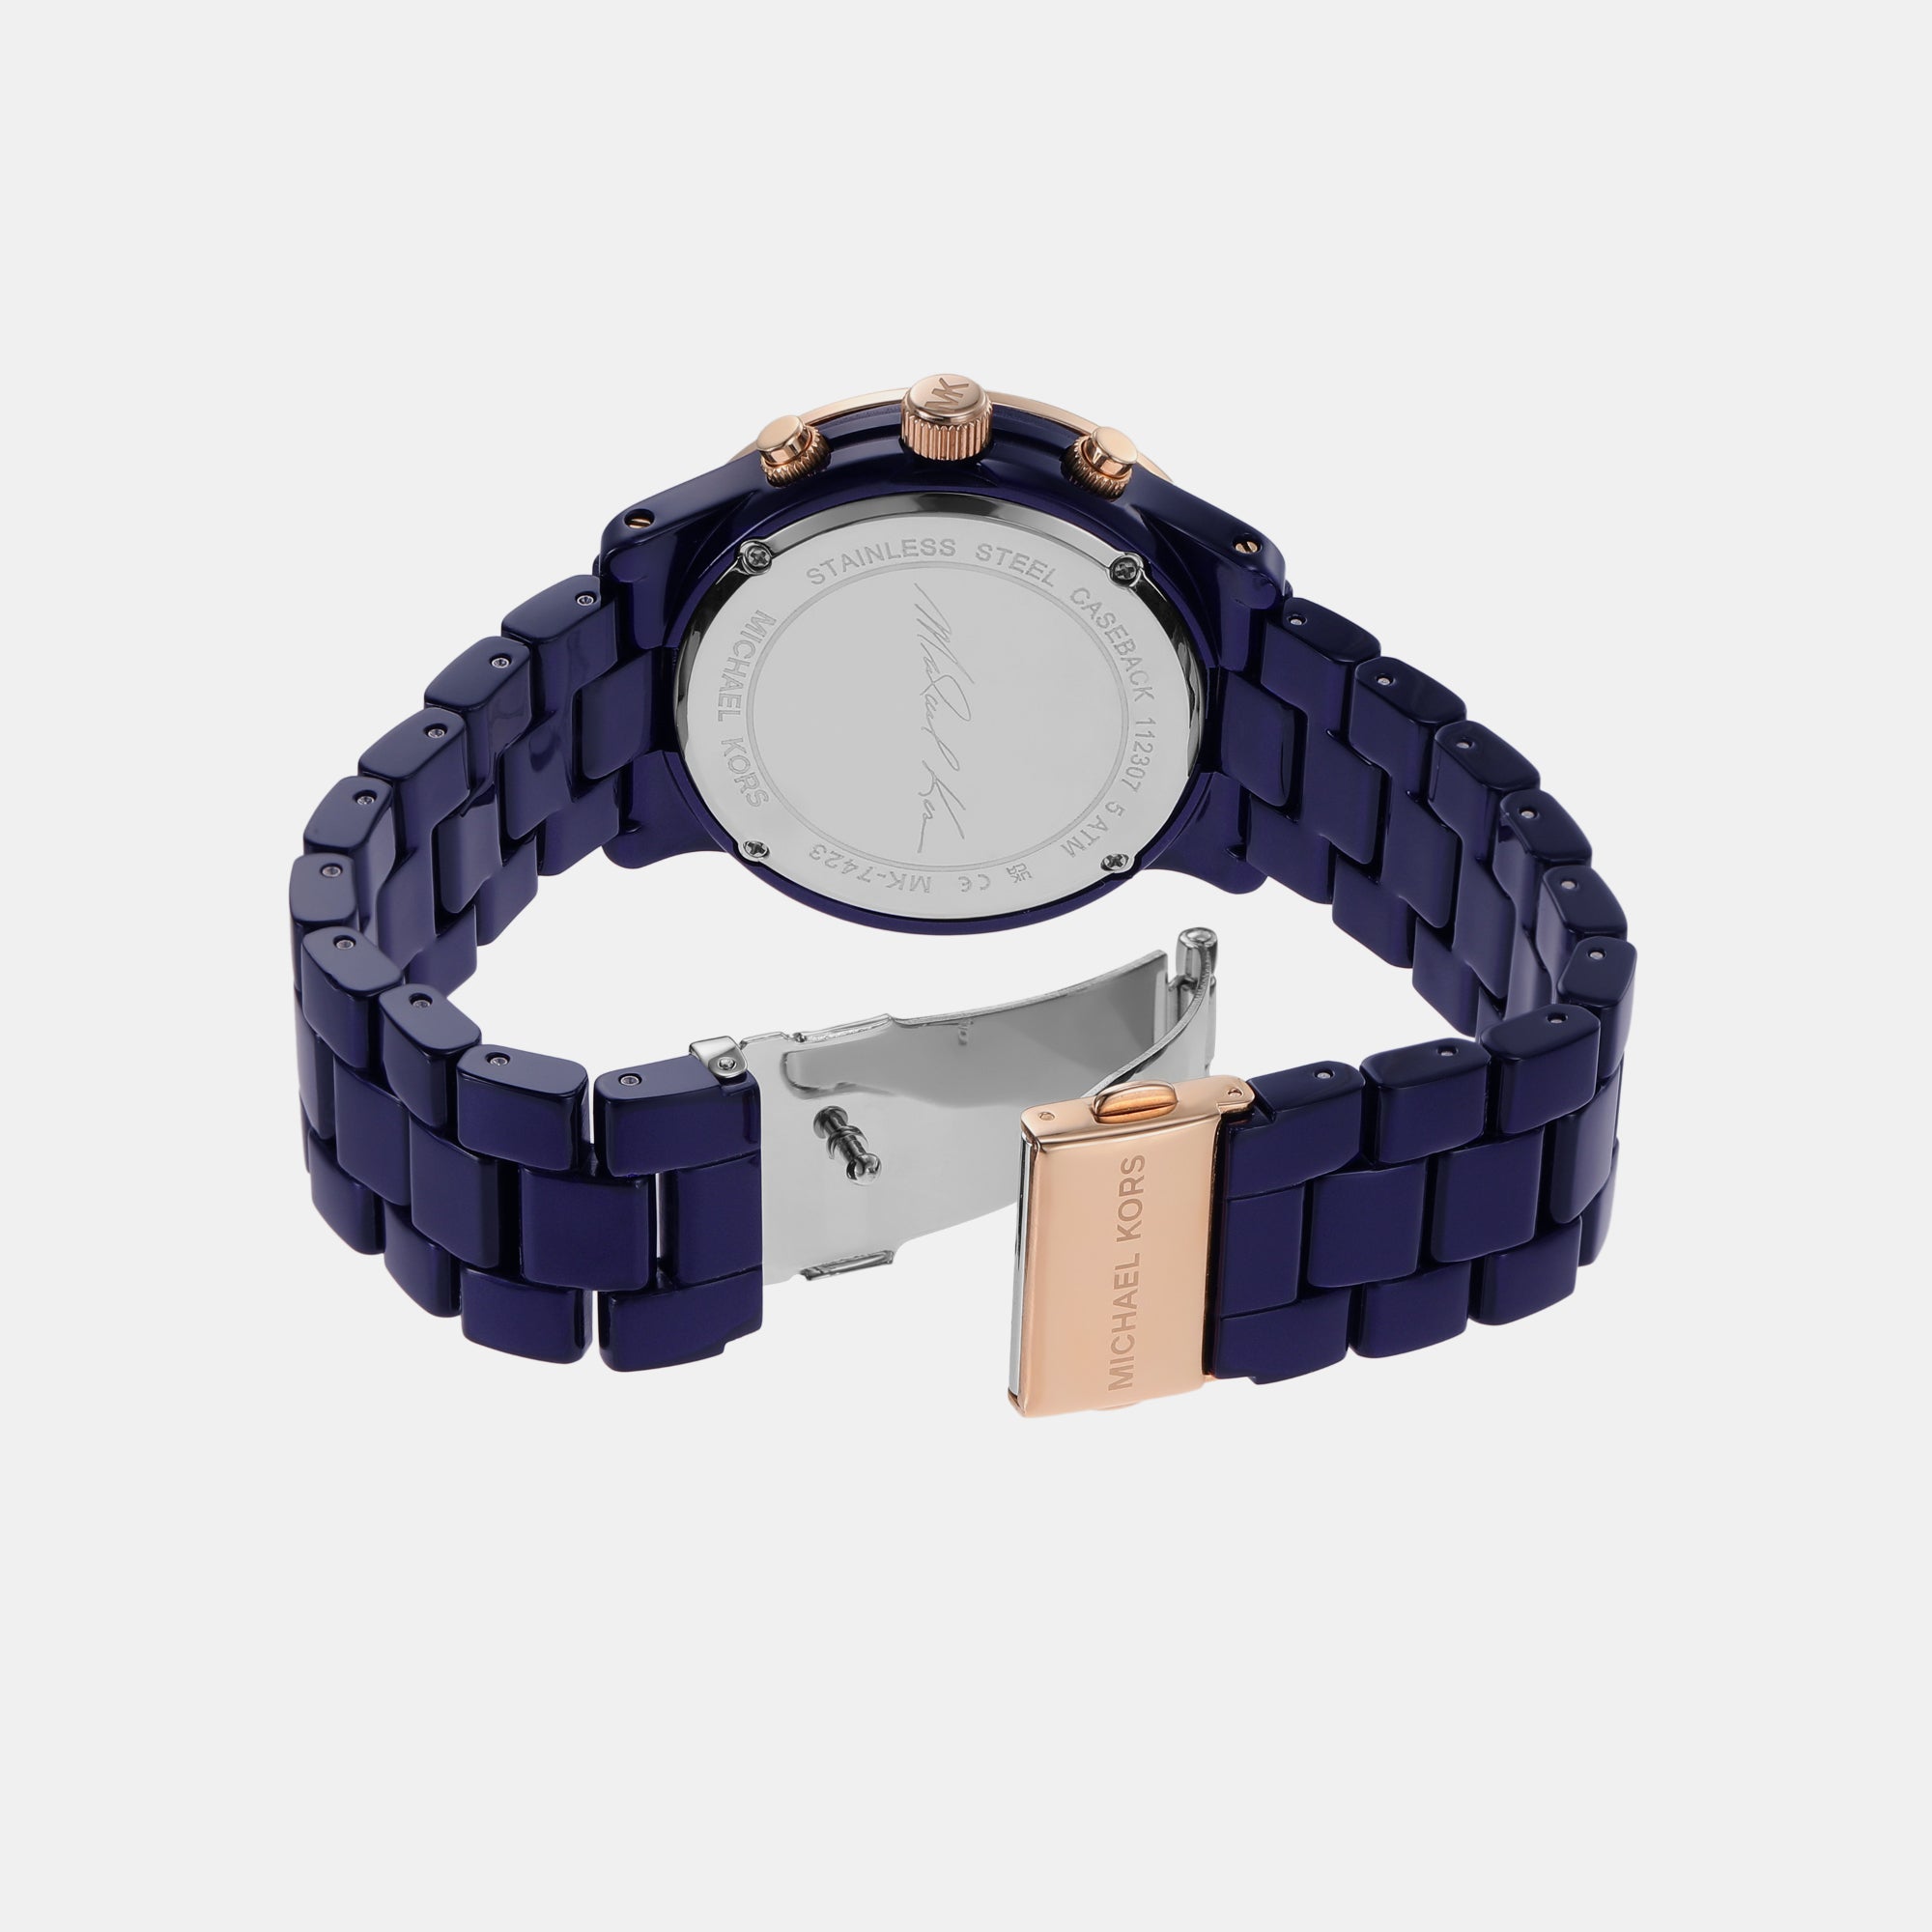 Female Runway Chronograph Navy Acetate Watch MK7423 – Just In Time